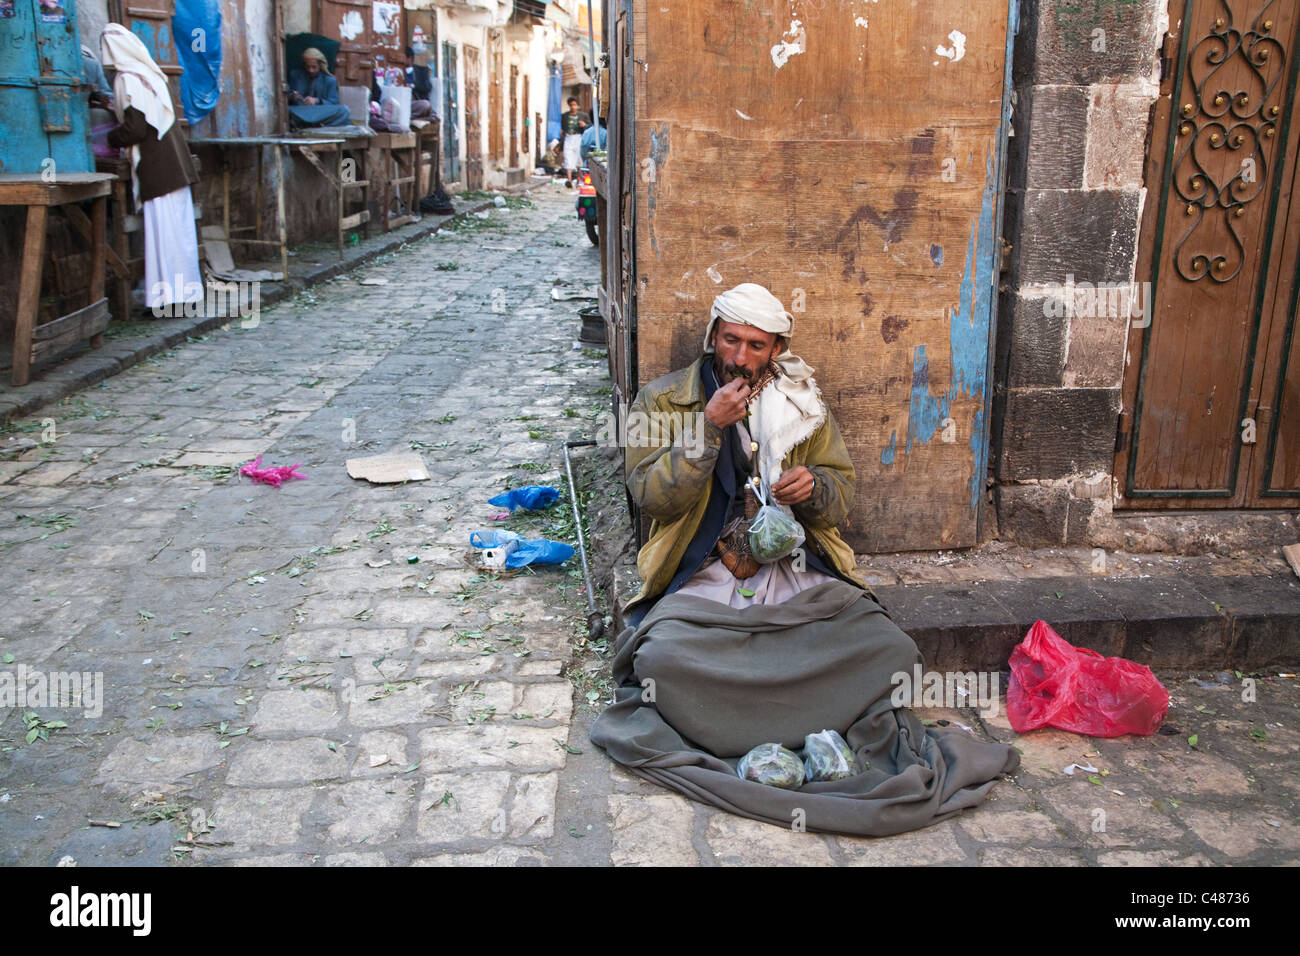 A khat seller in the Old city of Sana'a, Yemen. Stock Photo